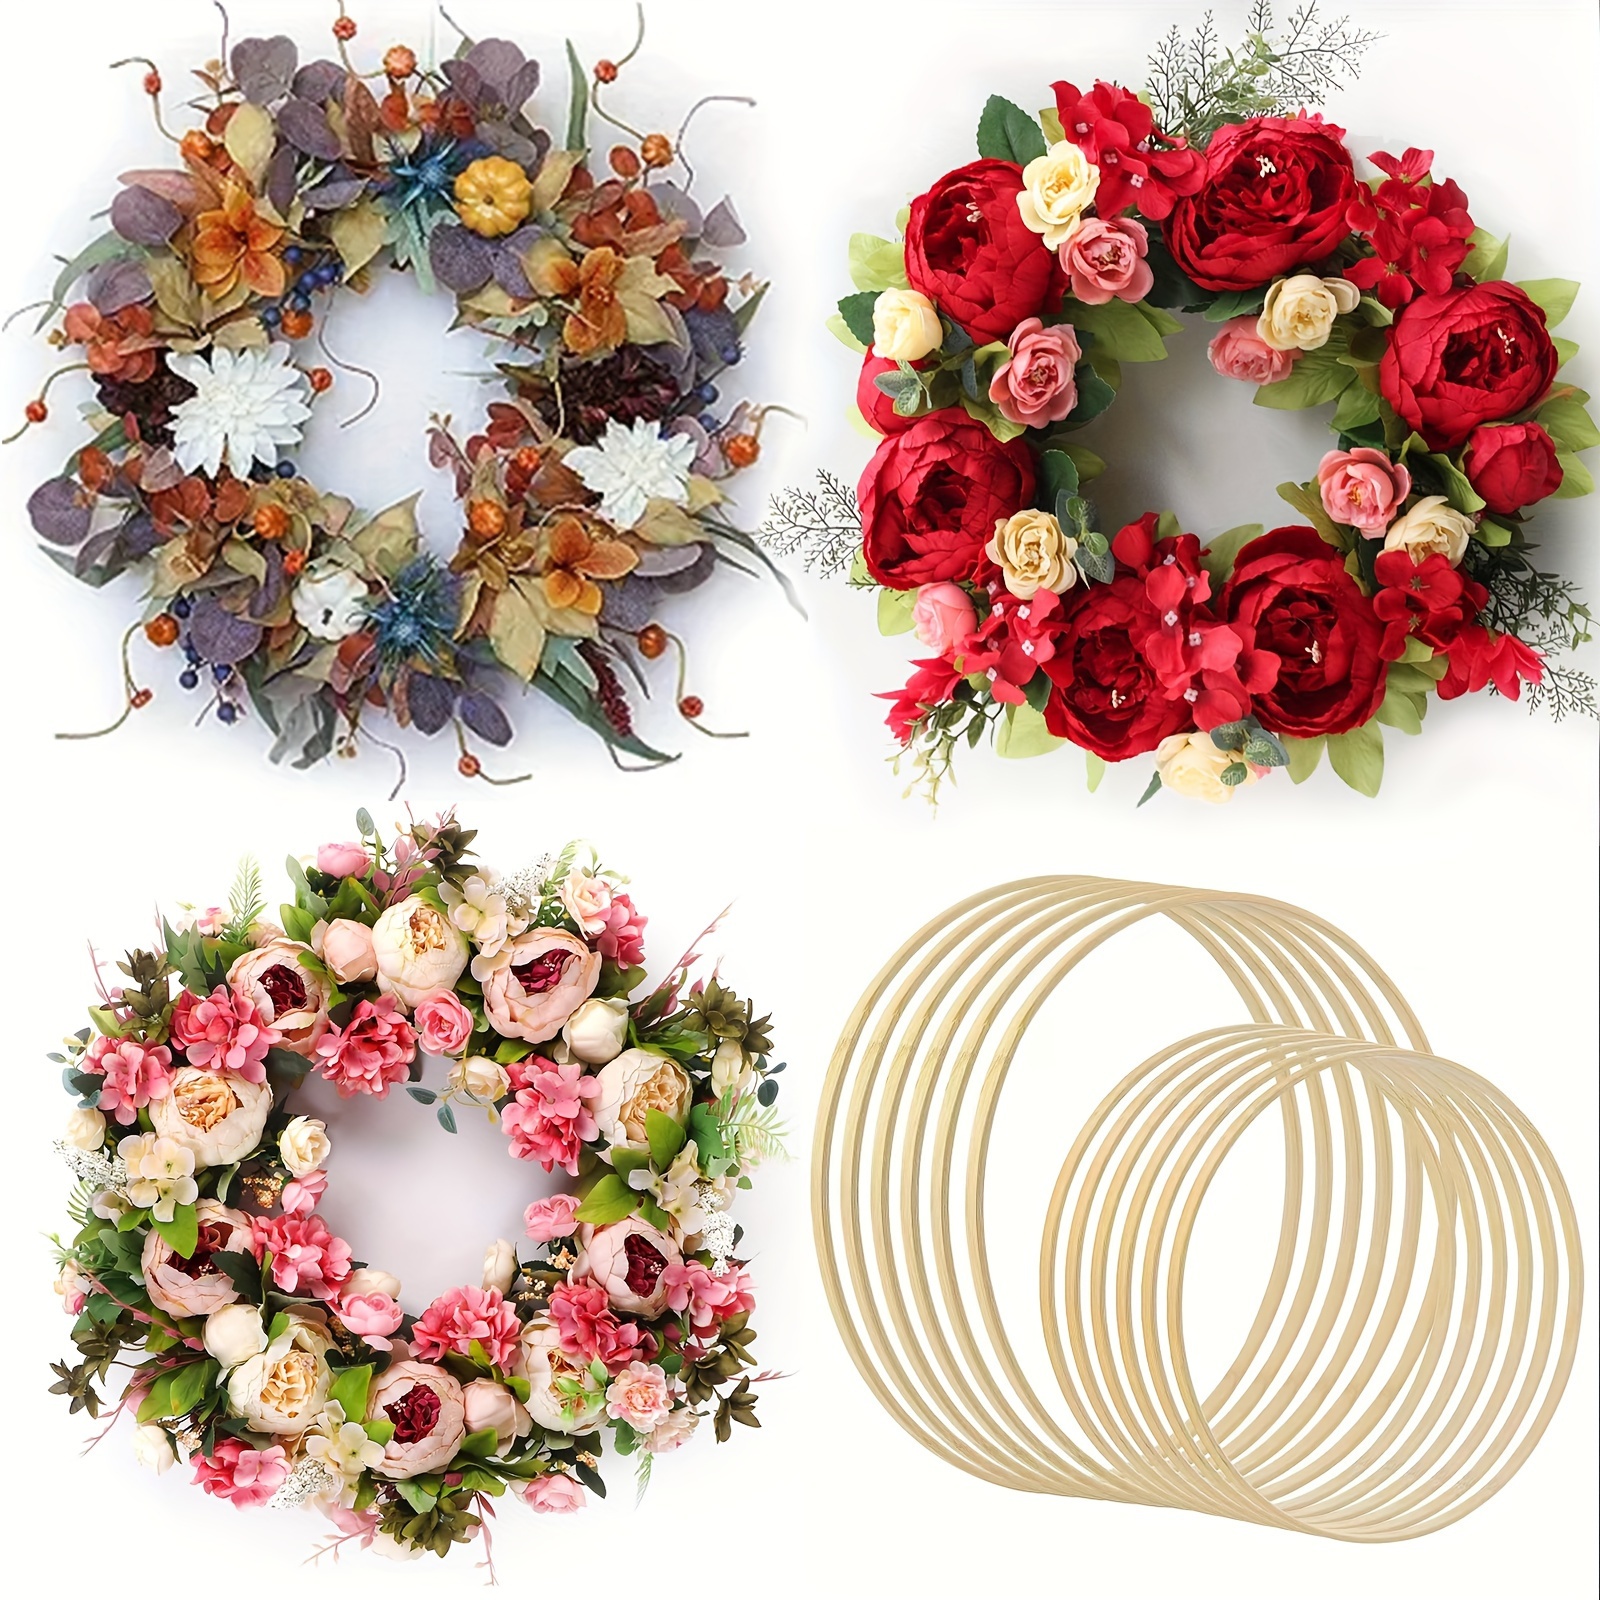 Worown 6 Pack 12 Inch Wooden Bamboo Floral Hoops Wreath Rings for DIY  Wedding Wreath Decor, Dream Catcher and Macrame Wall Hanging Crafts